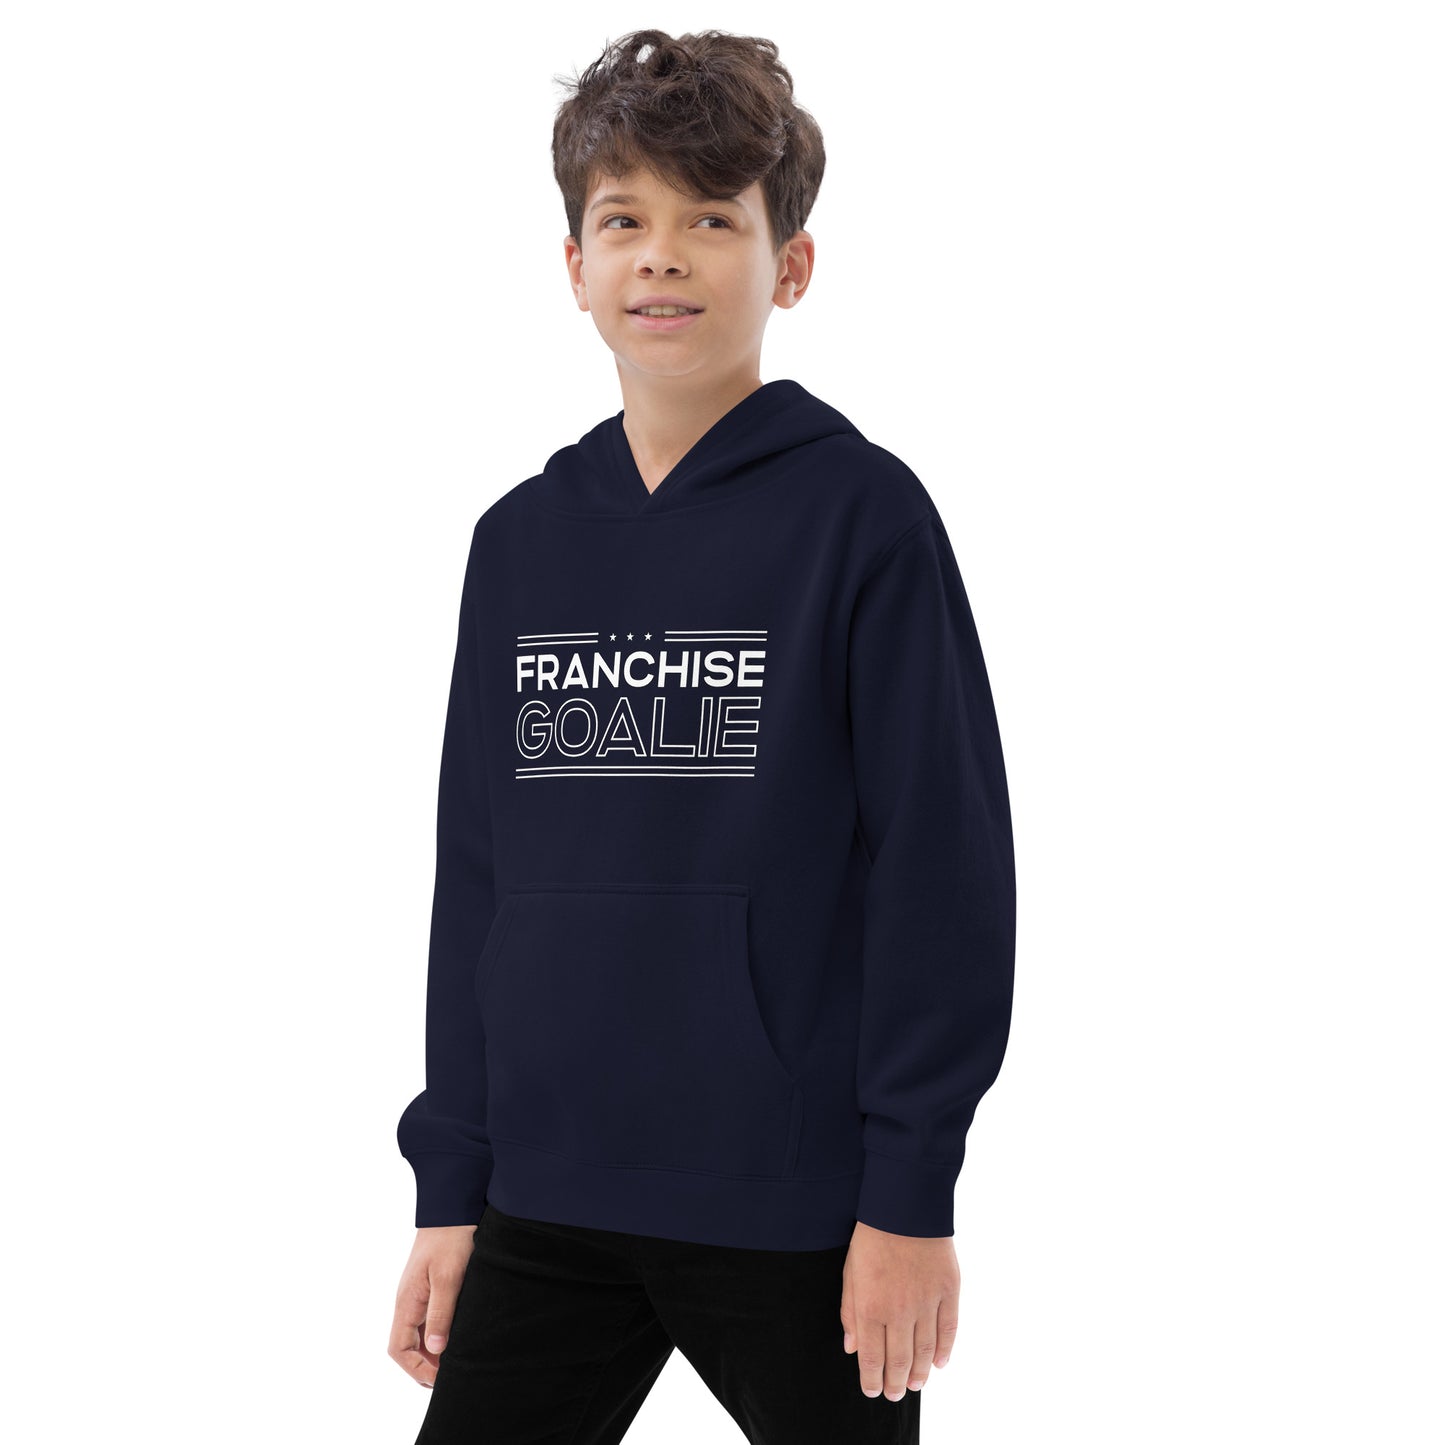 Franchise Goalie Youth Hoodie